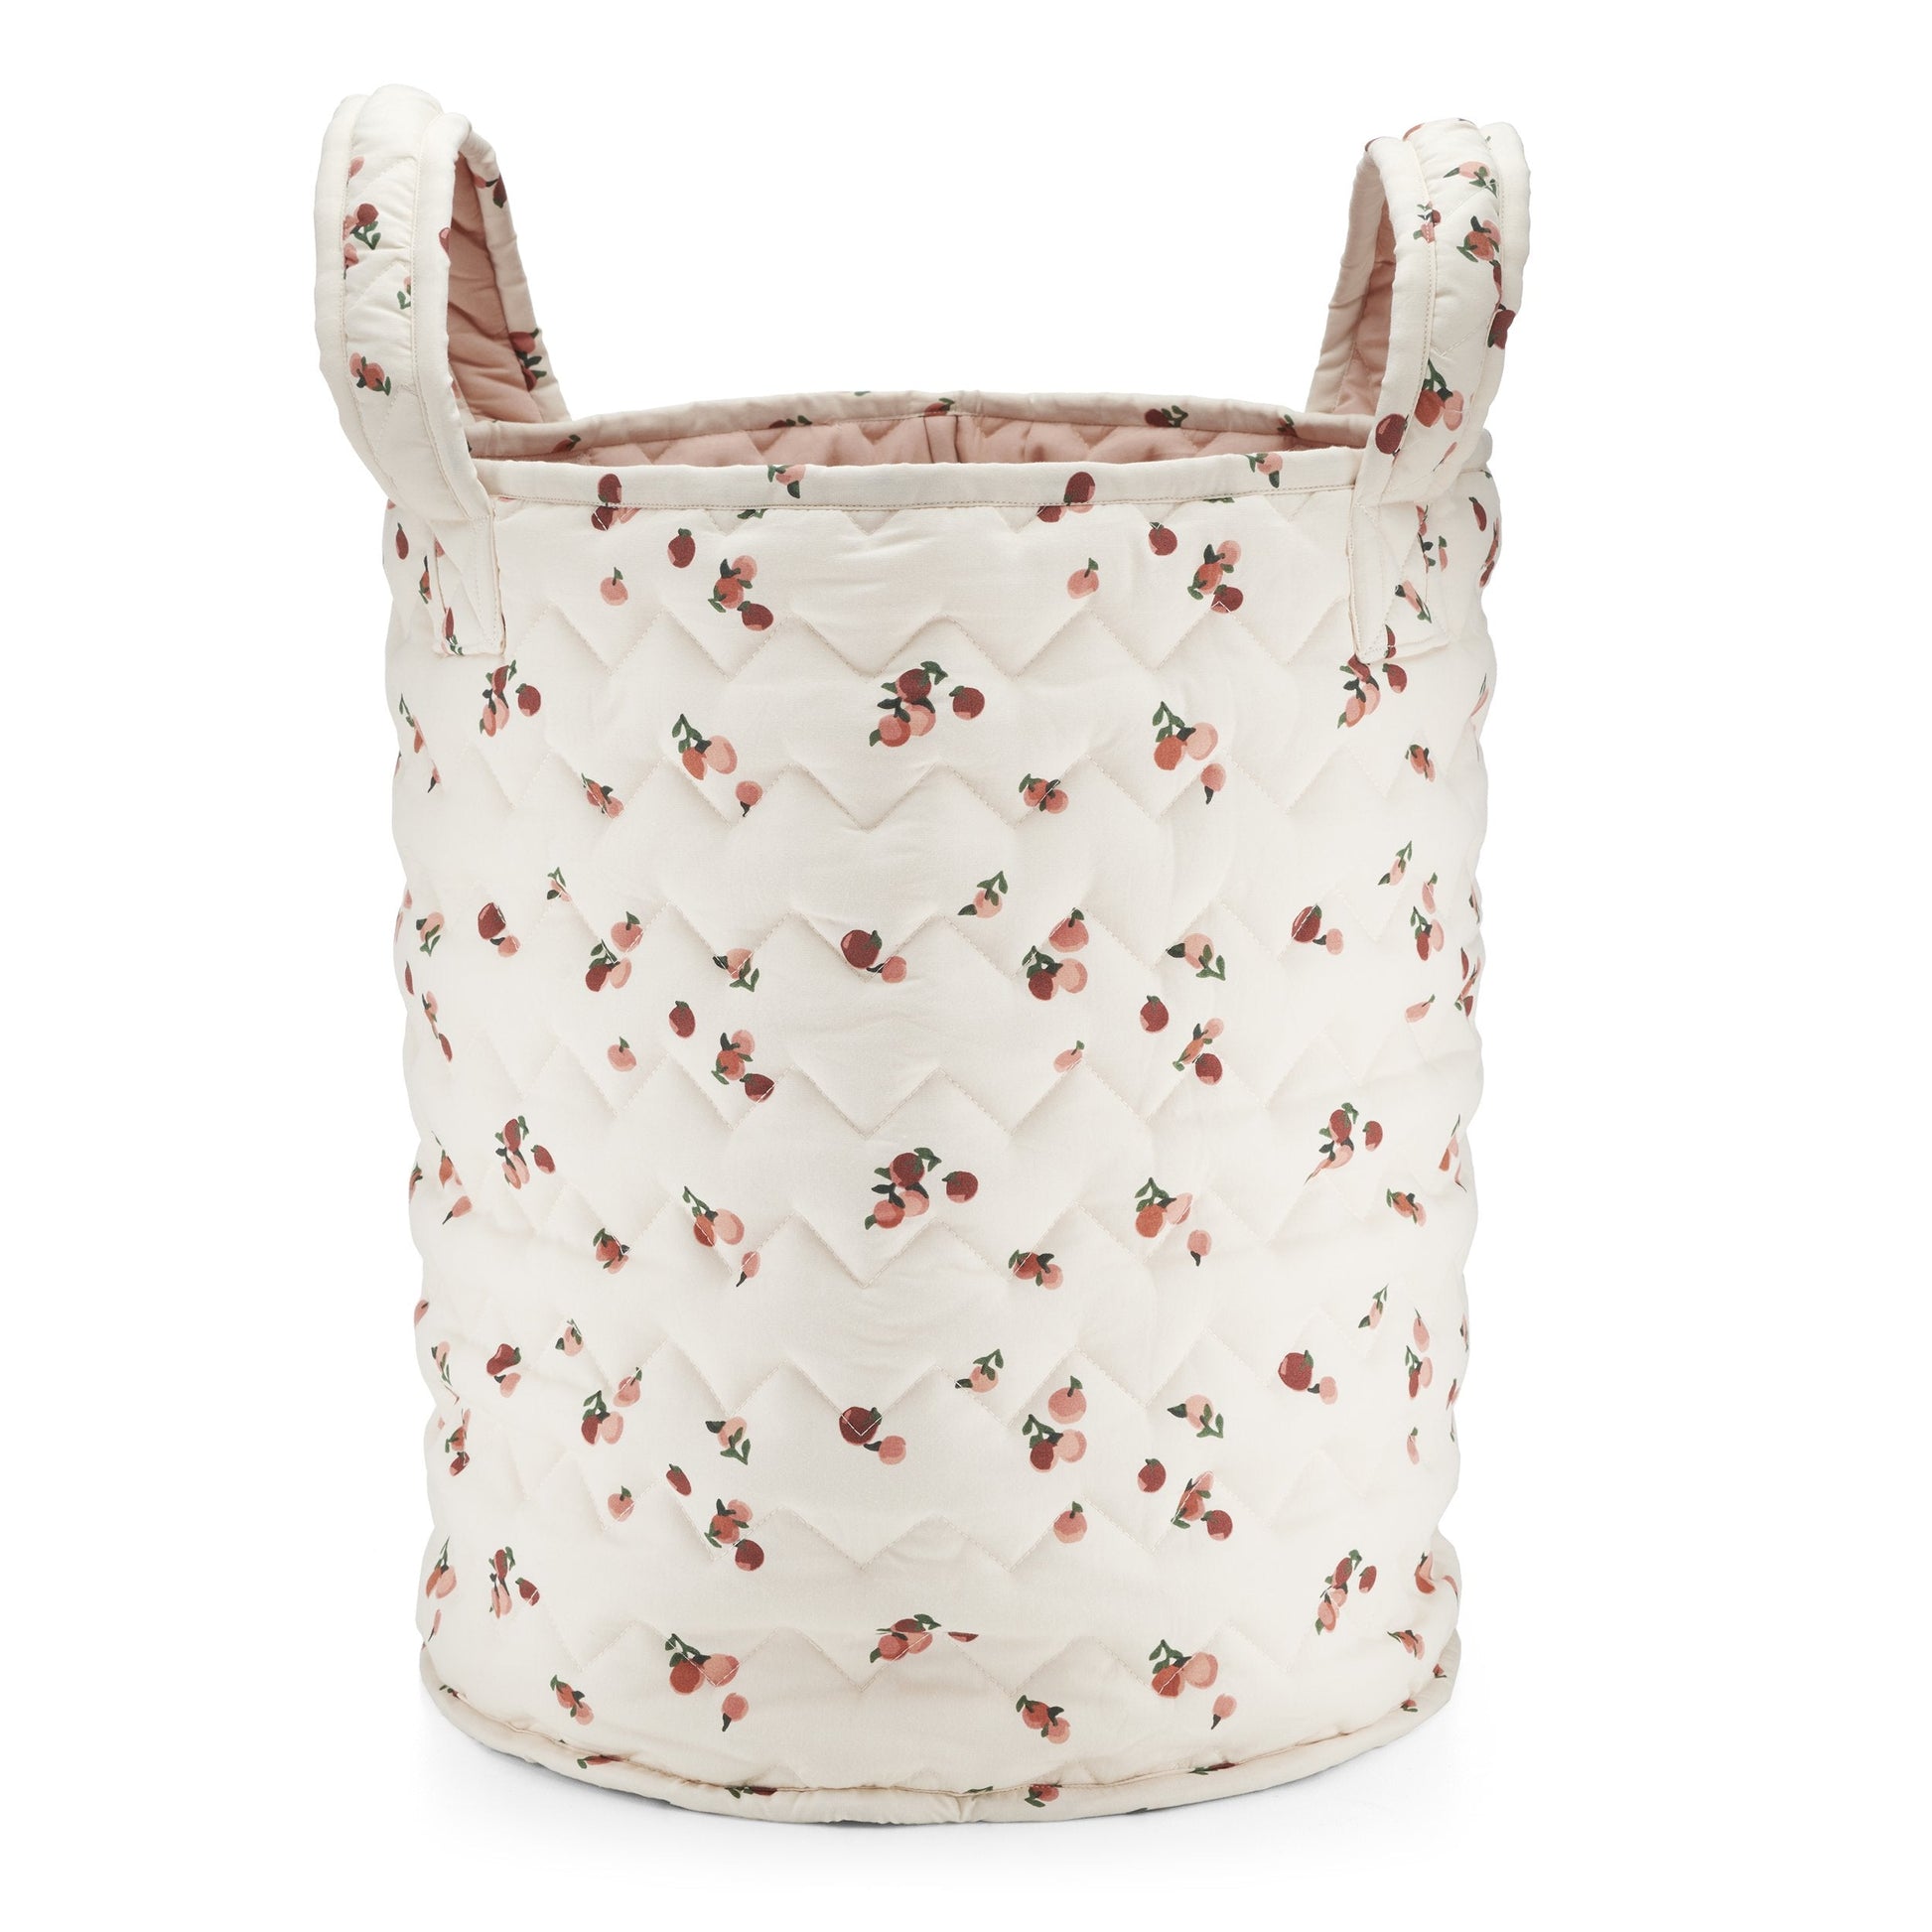 Avery Row Large Quilted Storage Basket - Peaches